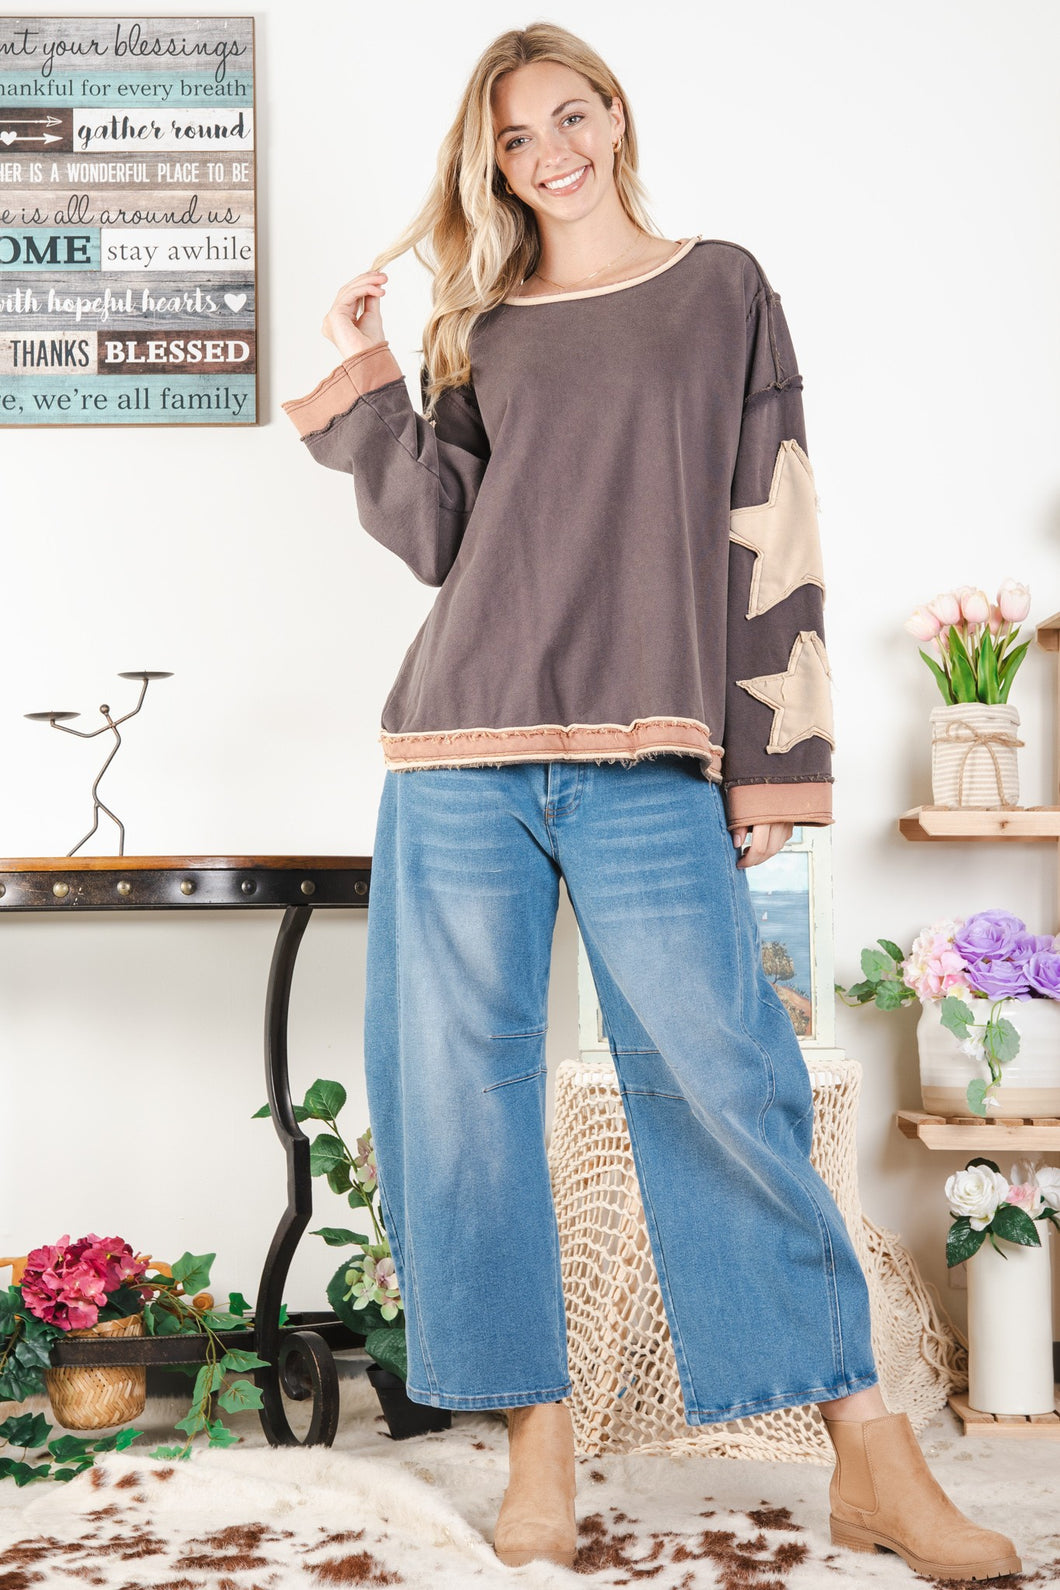 BlueVelvet Oversized Star Patched Top in Brown Combo